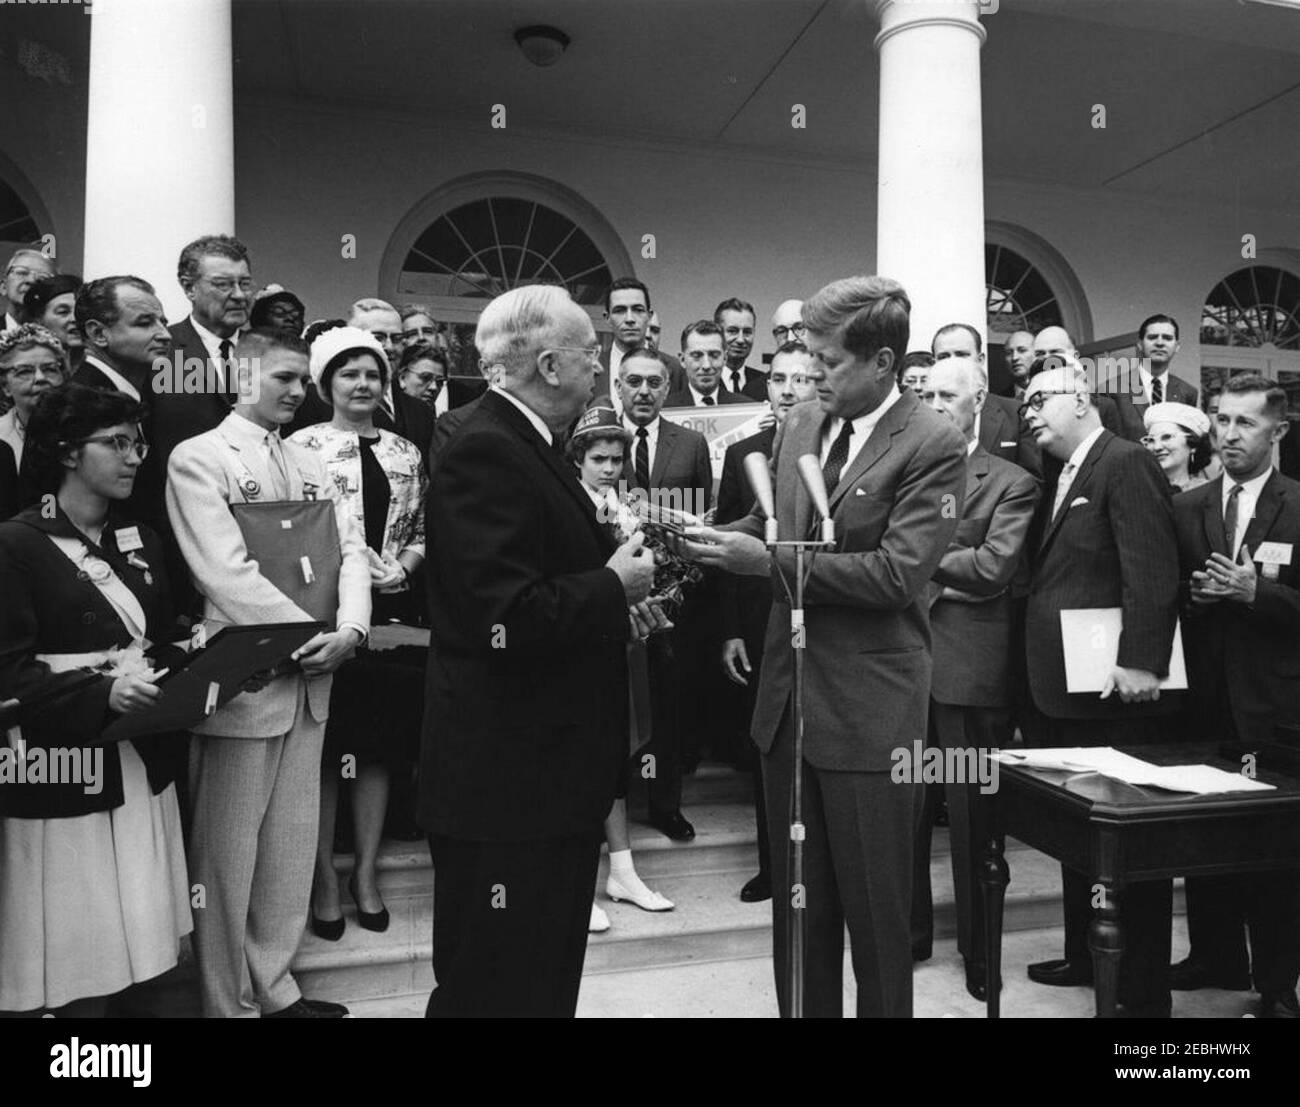 Presentation of the American Automobile Association (AAA) Lifesaving Awards in the Rose Garden, 9:50AM. President John F. Kennedy (center) receives a gift of an American Automobile Association (AAA) medal from President of the AAA Traffic Safety Foundation, Judge Clarence E. Bodie, during the AAA Lifesaving Awards ceremony; five members of the organizationu2019s School Safety Patrol received the award. Those pictured include: award recipients Patricia Miller (of Hereford, Pennsylvania) and Wesley Haines (of Dayton, Ohio); Senator George A. Smathers (Florida); Representative Paul F. Schenck (O Stock Photo